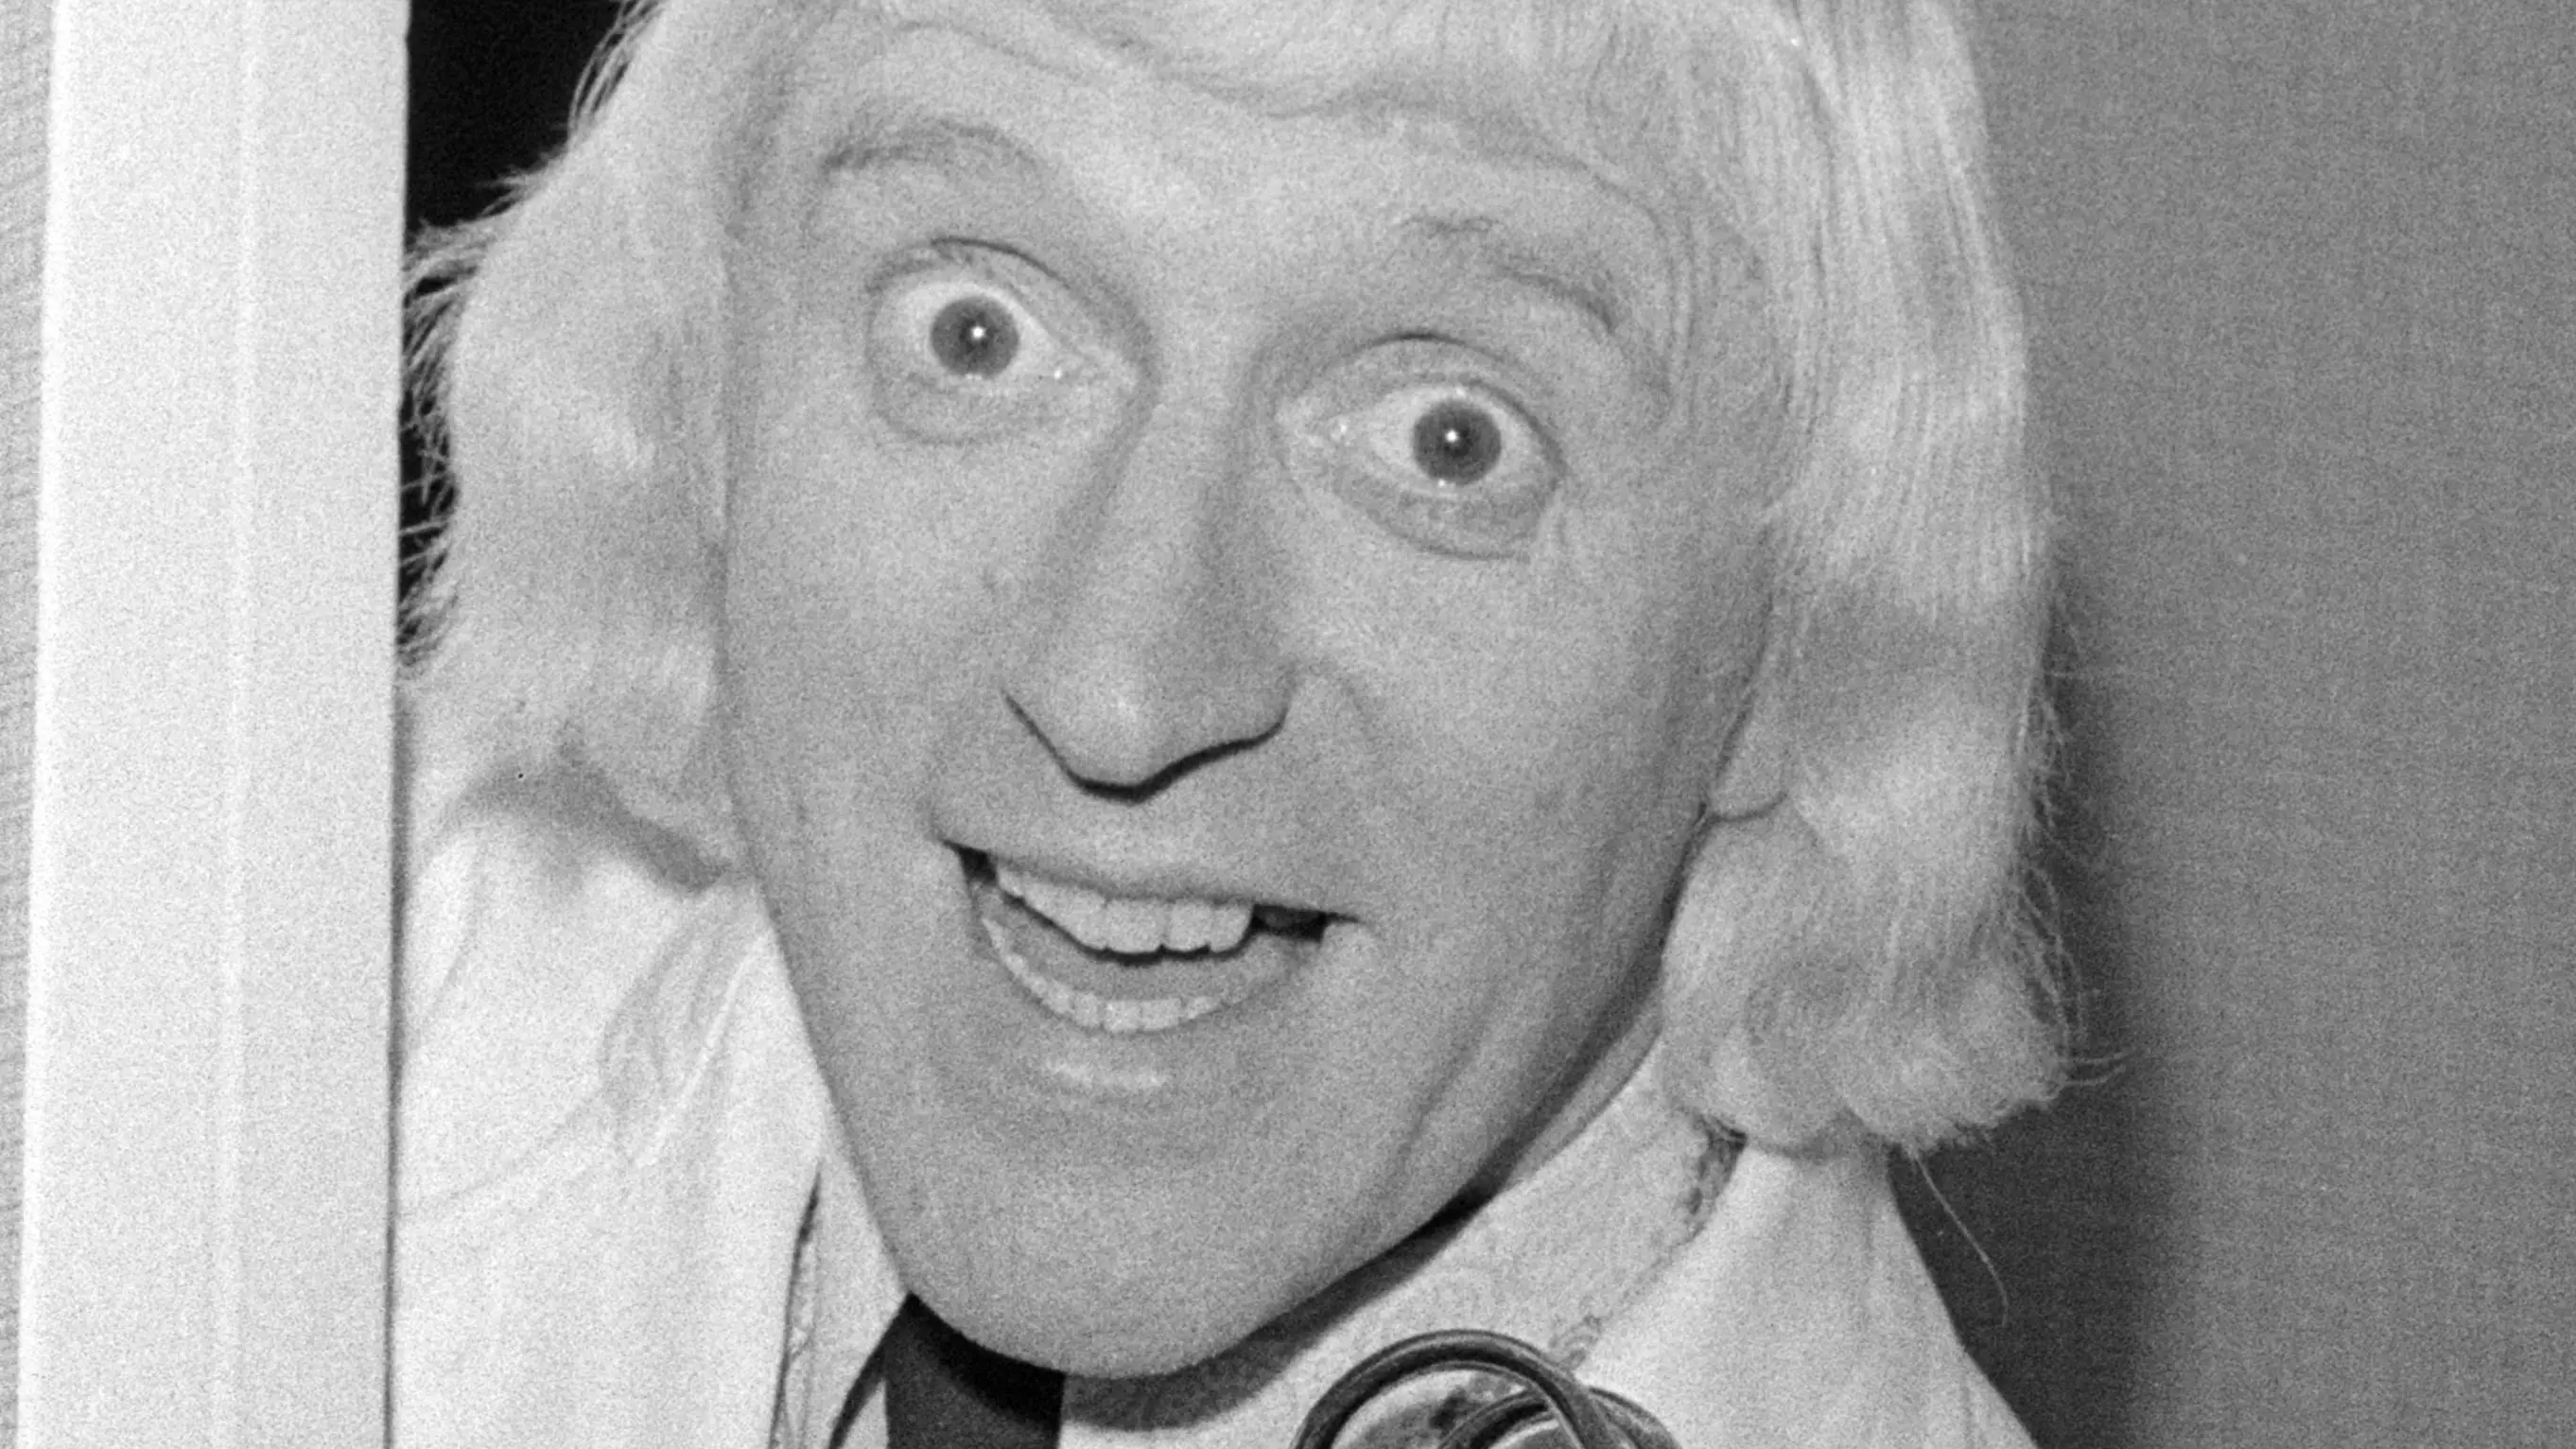 'The Reckoning': New BBC Series On Jimmy Savile Is Coming